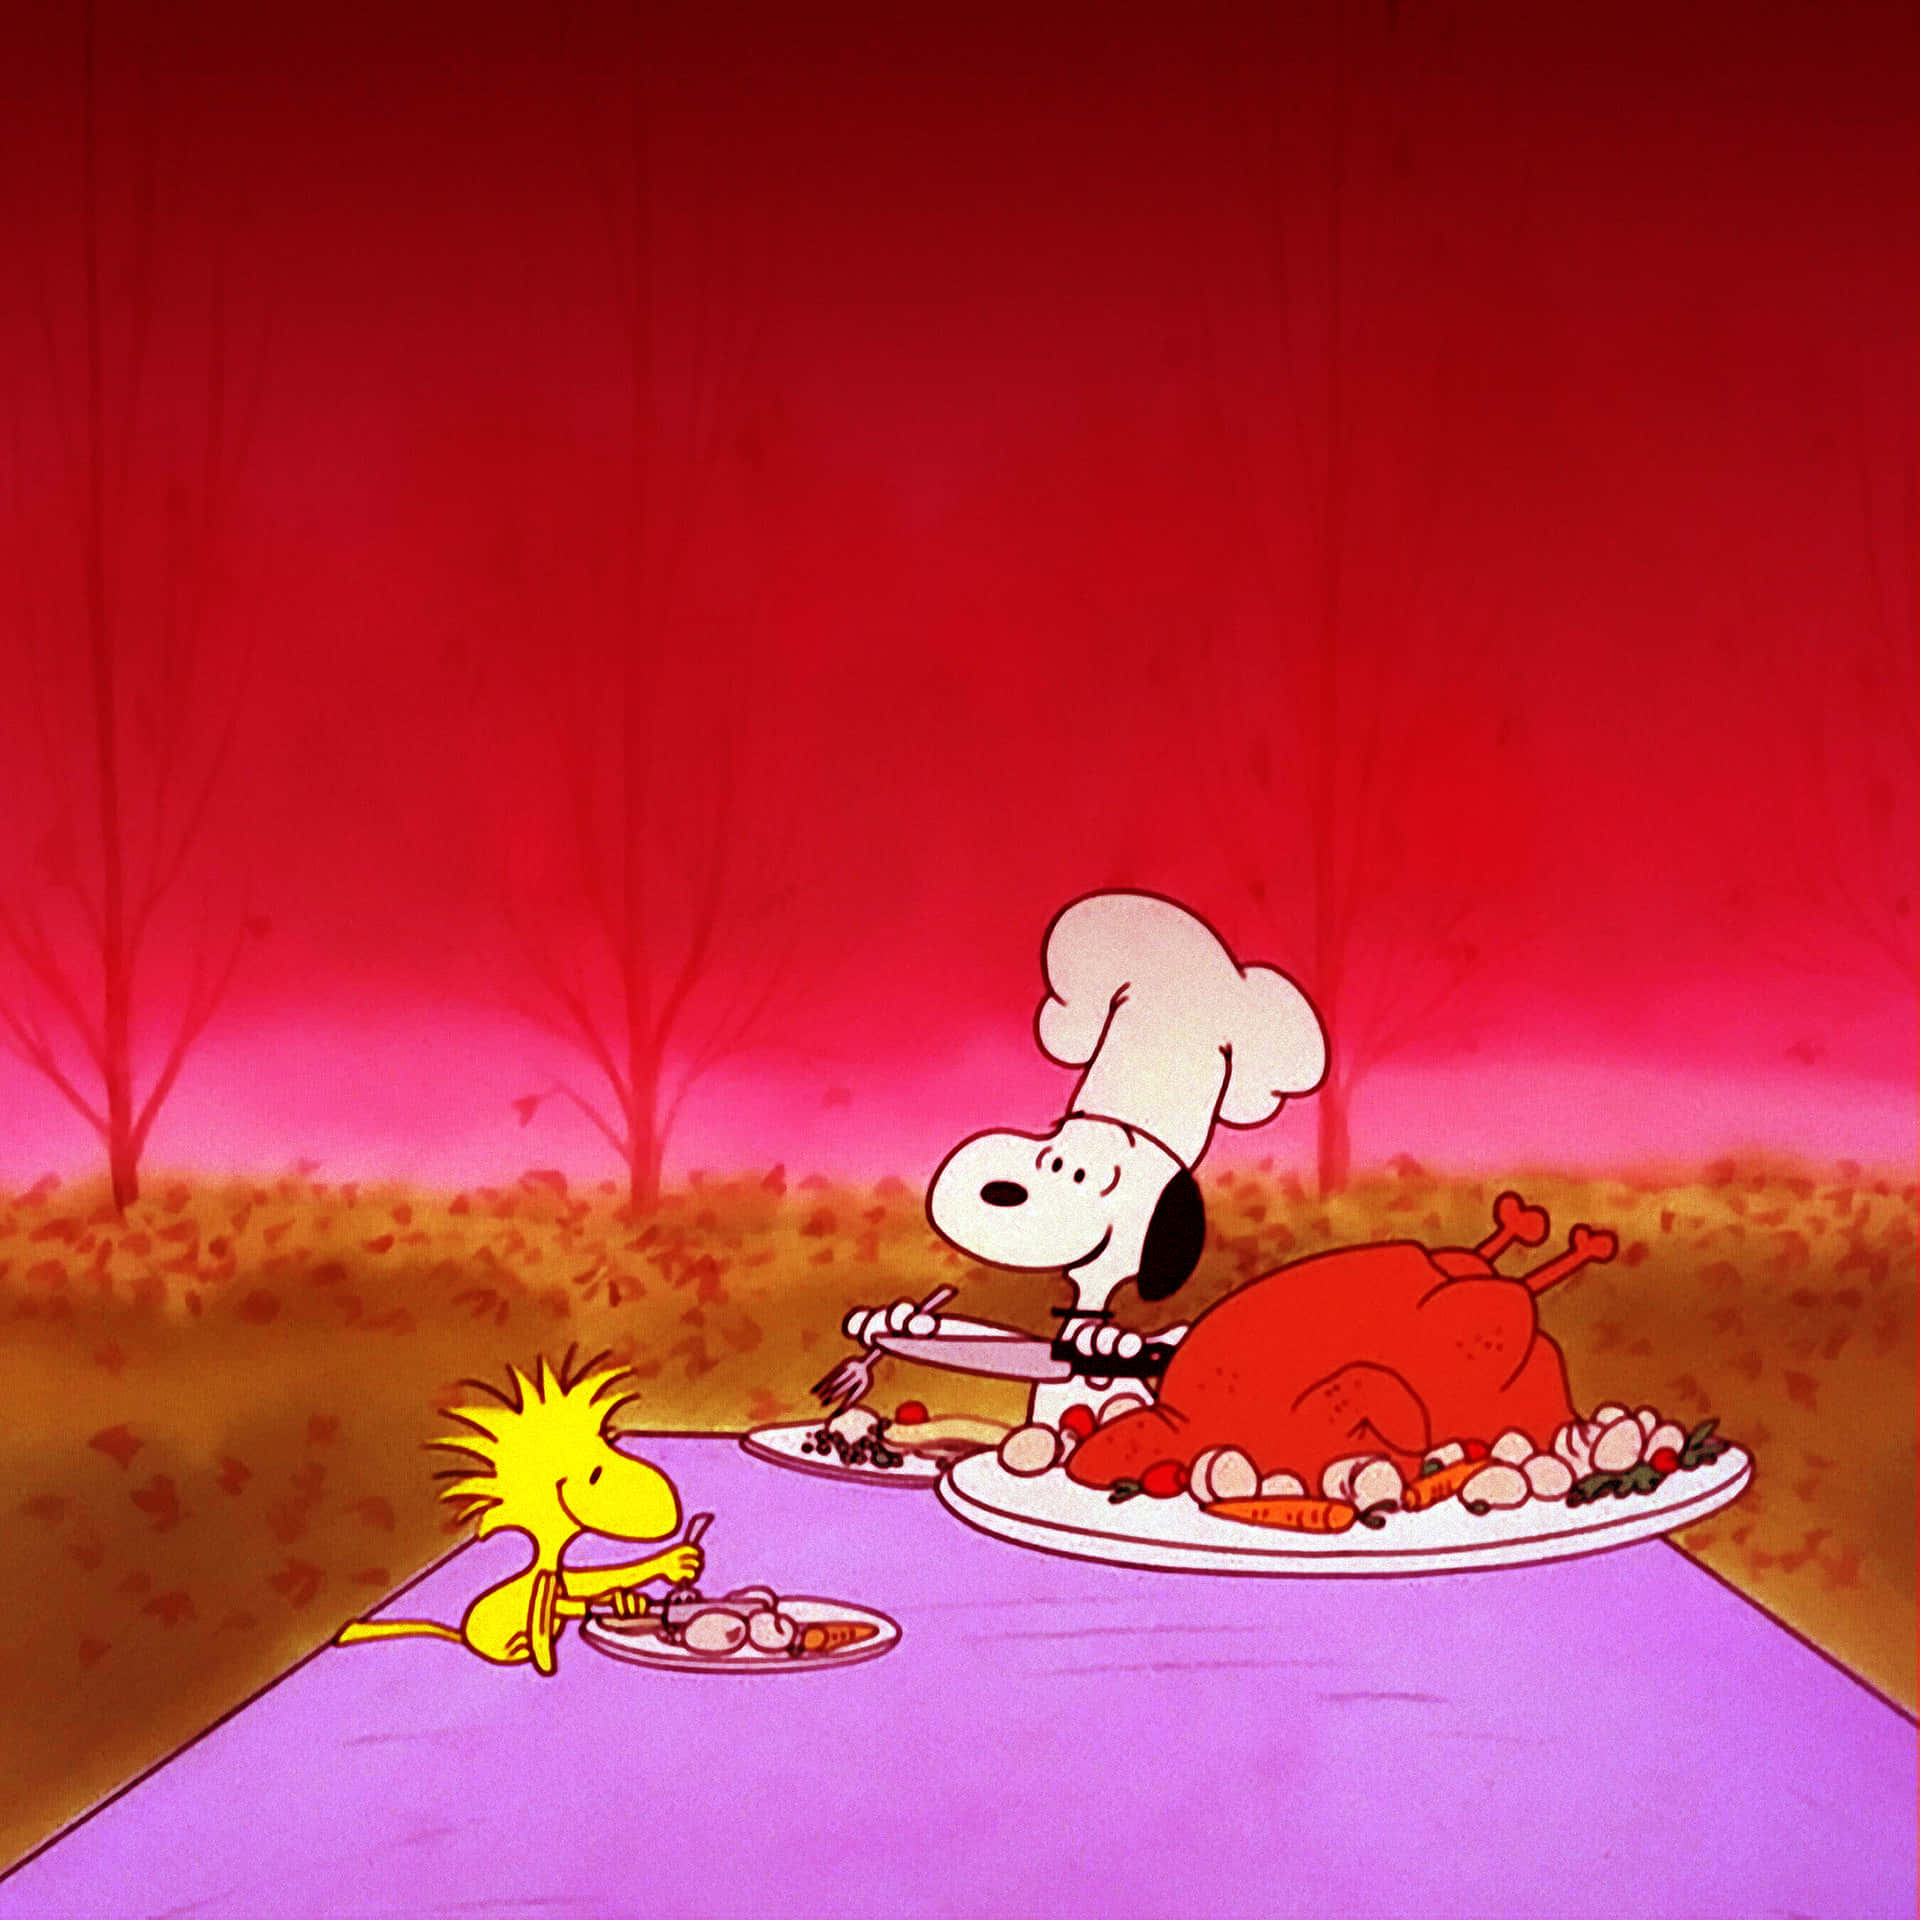 Snoopy celebrating Thanksgiving with a feast Wallpaper